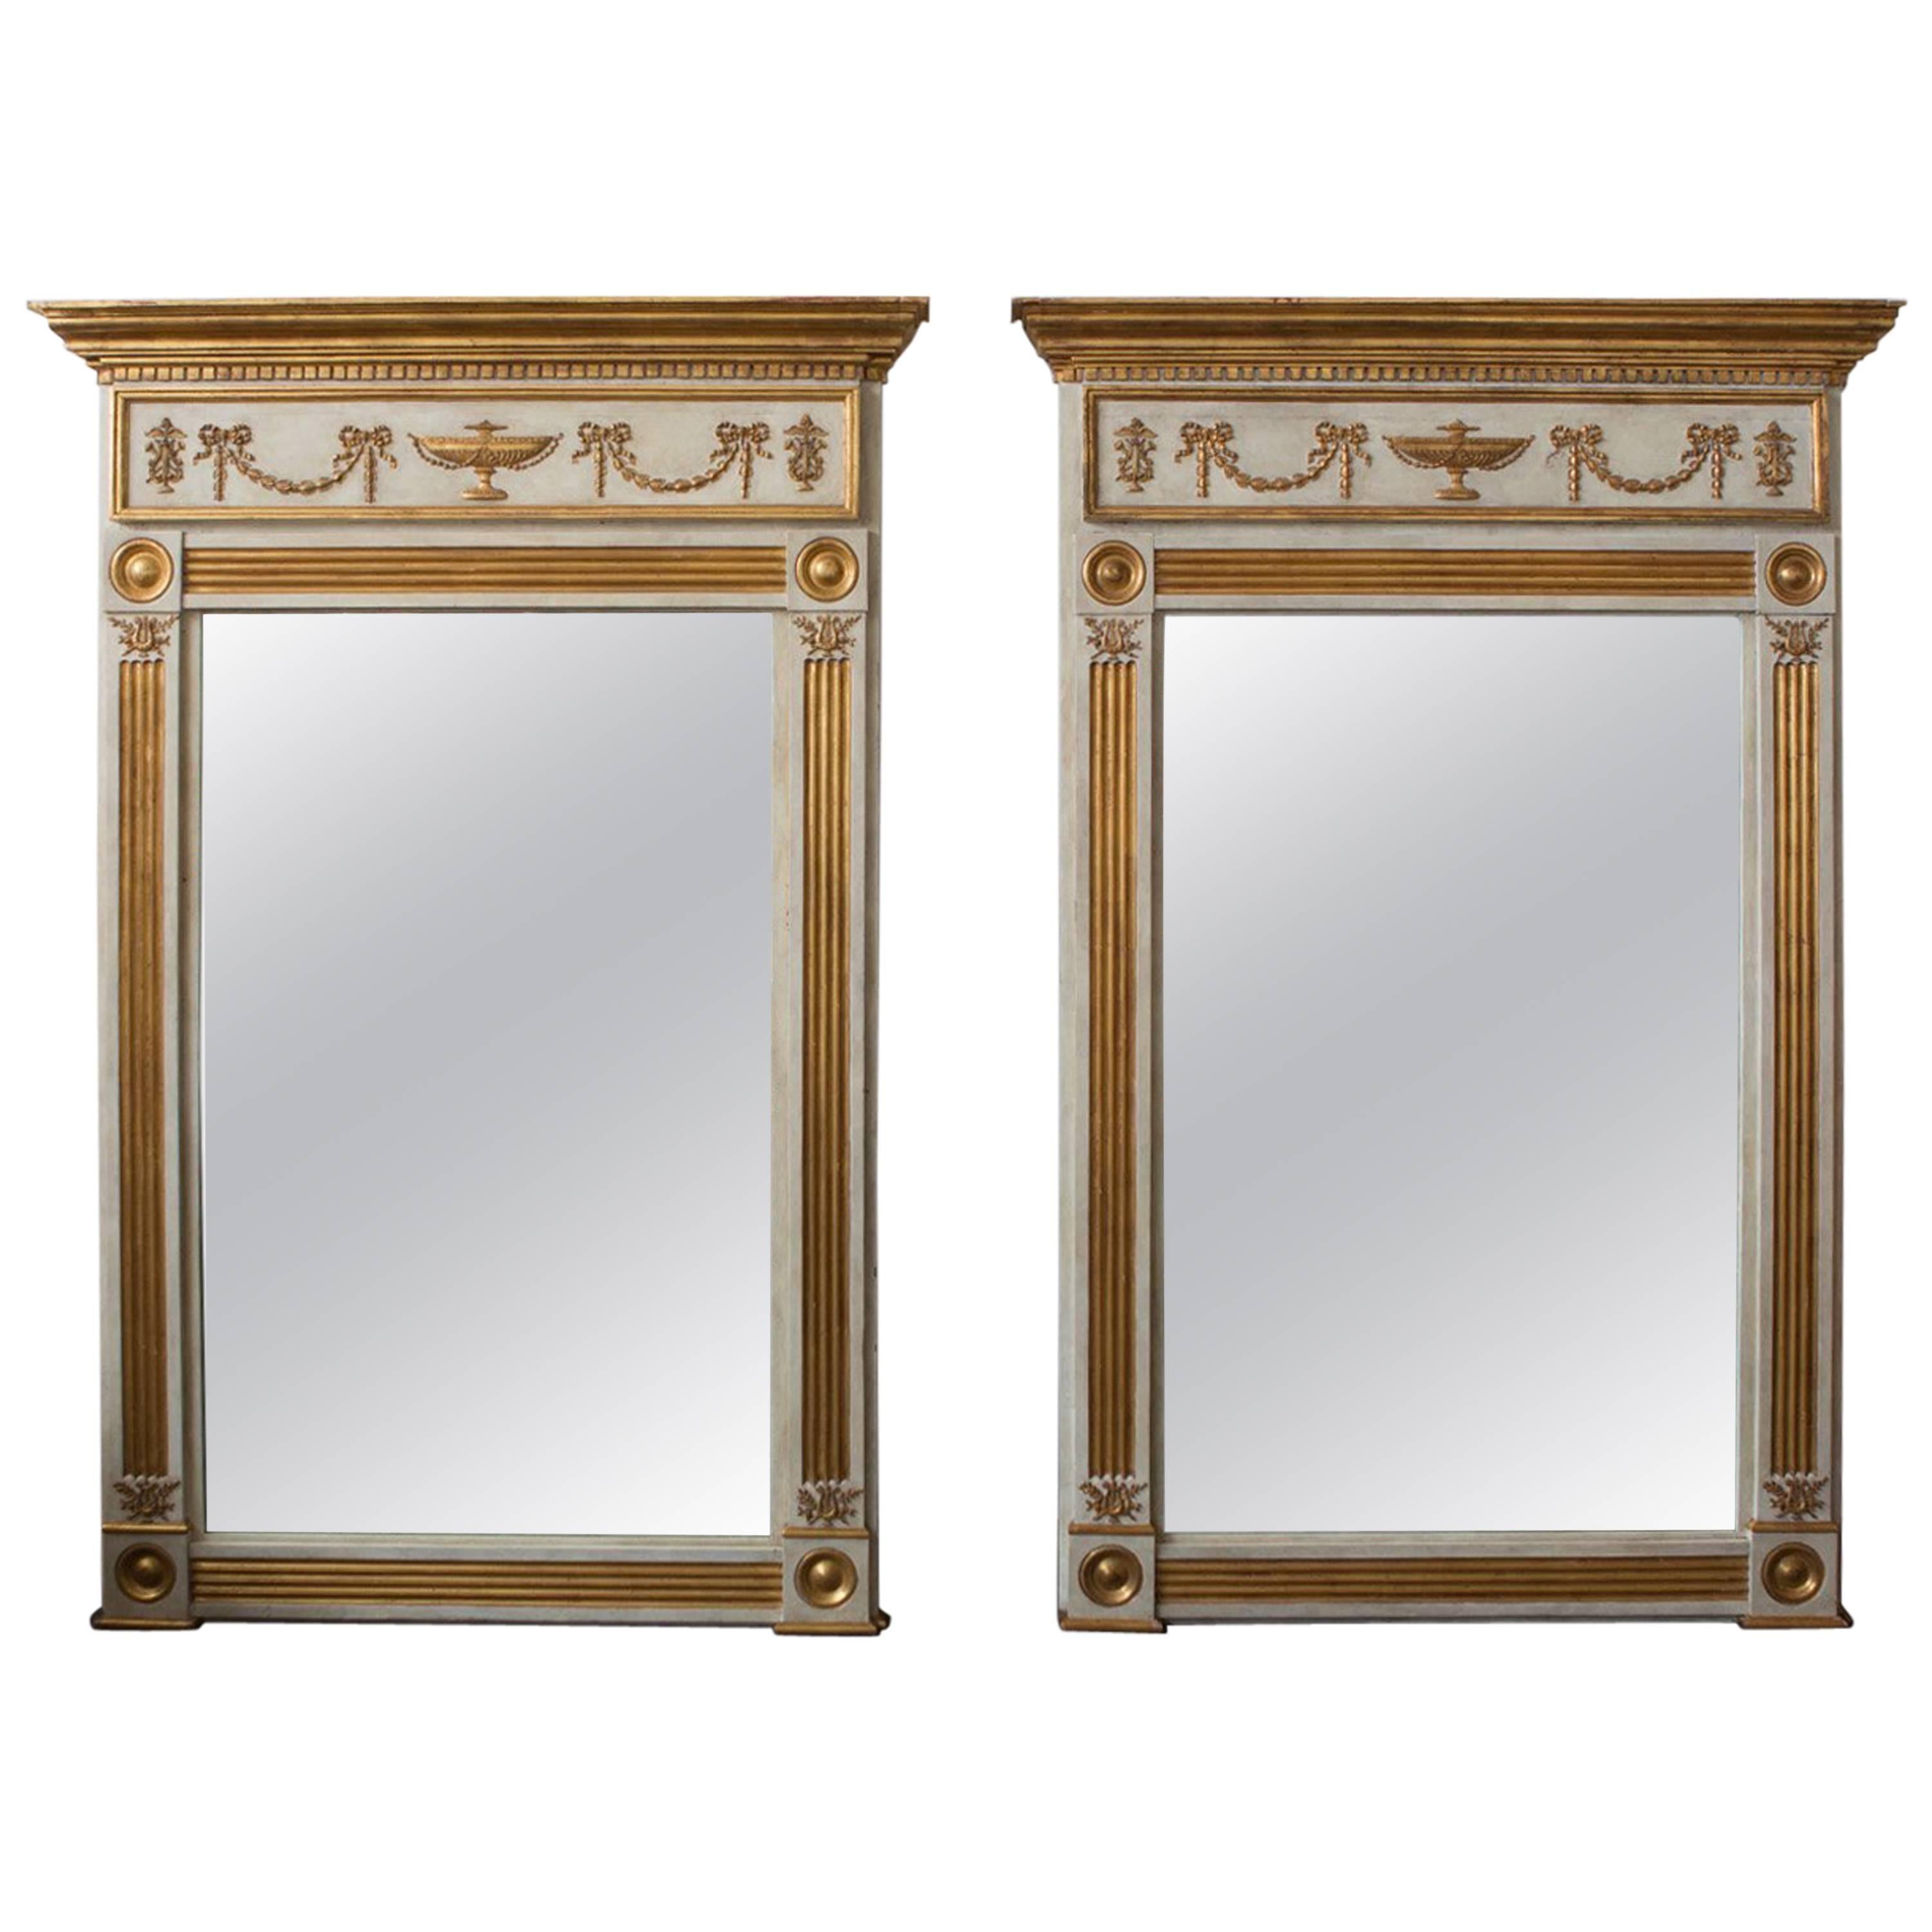 Monumental Pair of Neoclassical French Mirrors